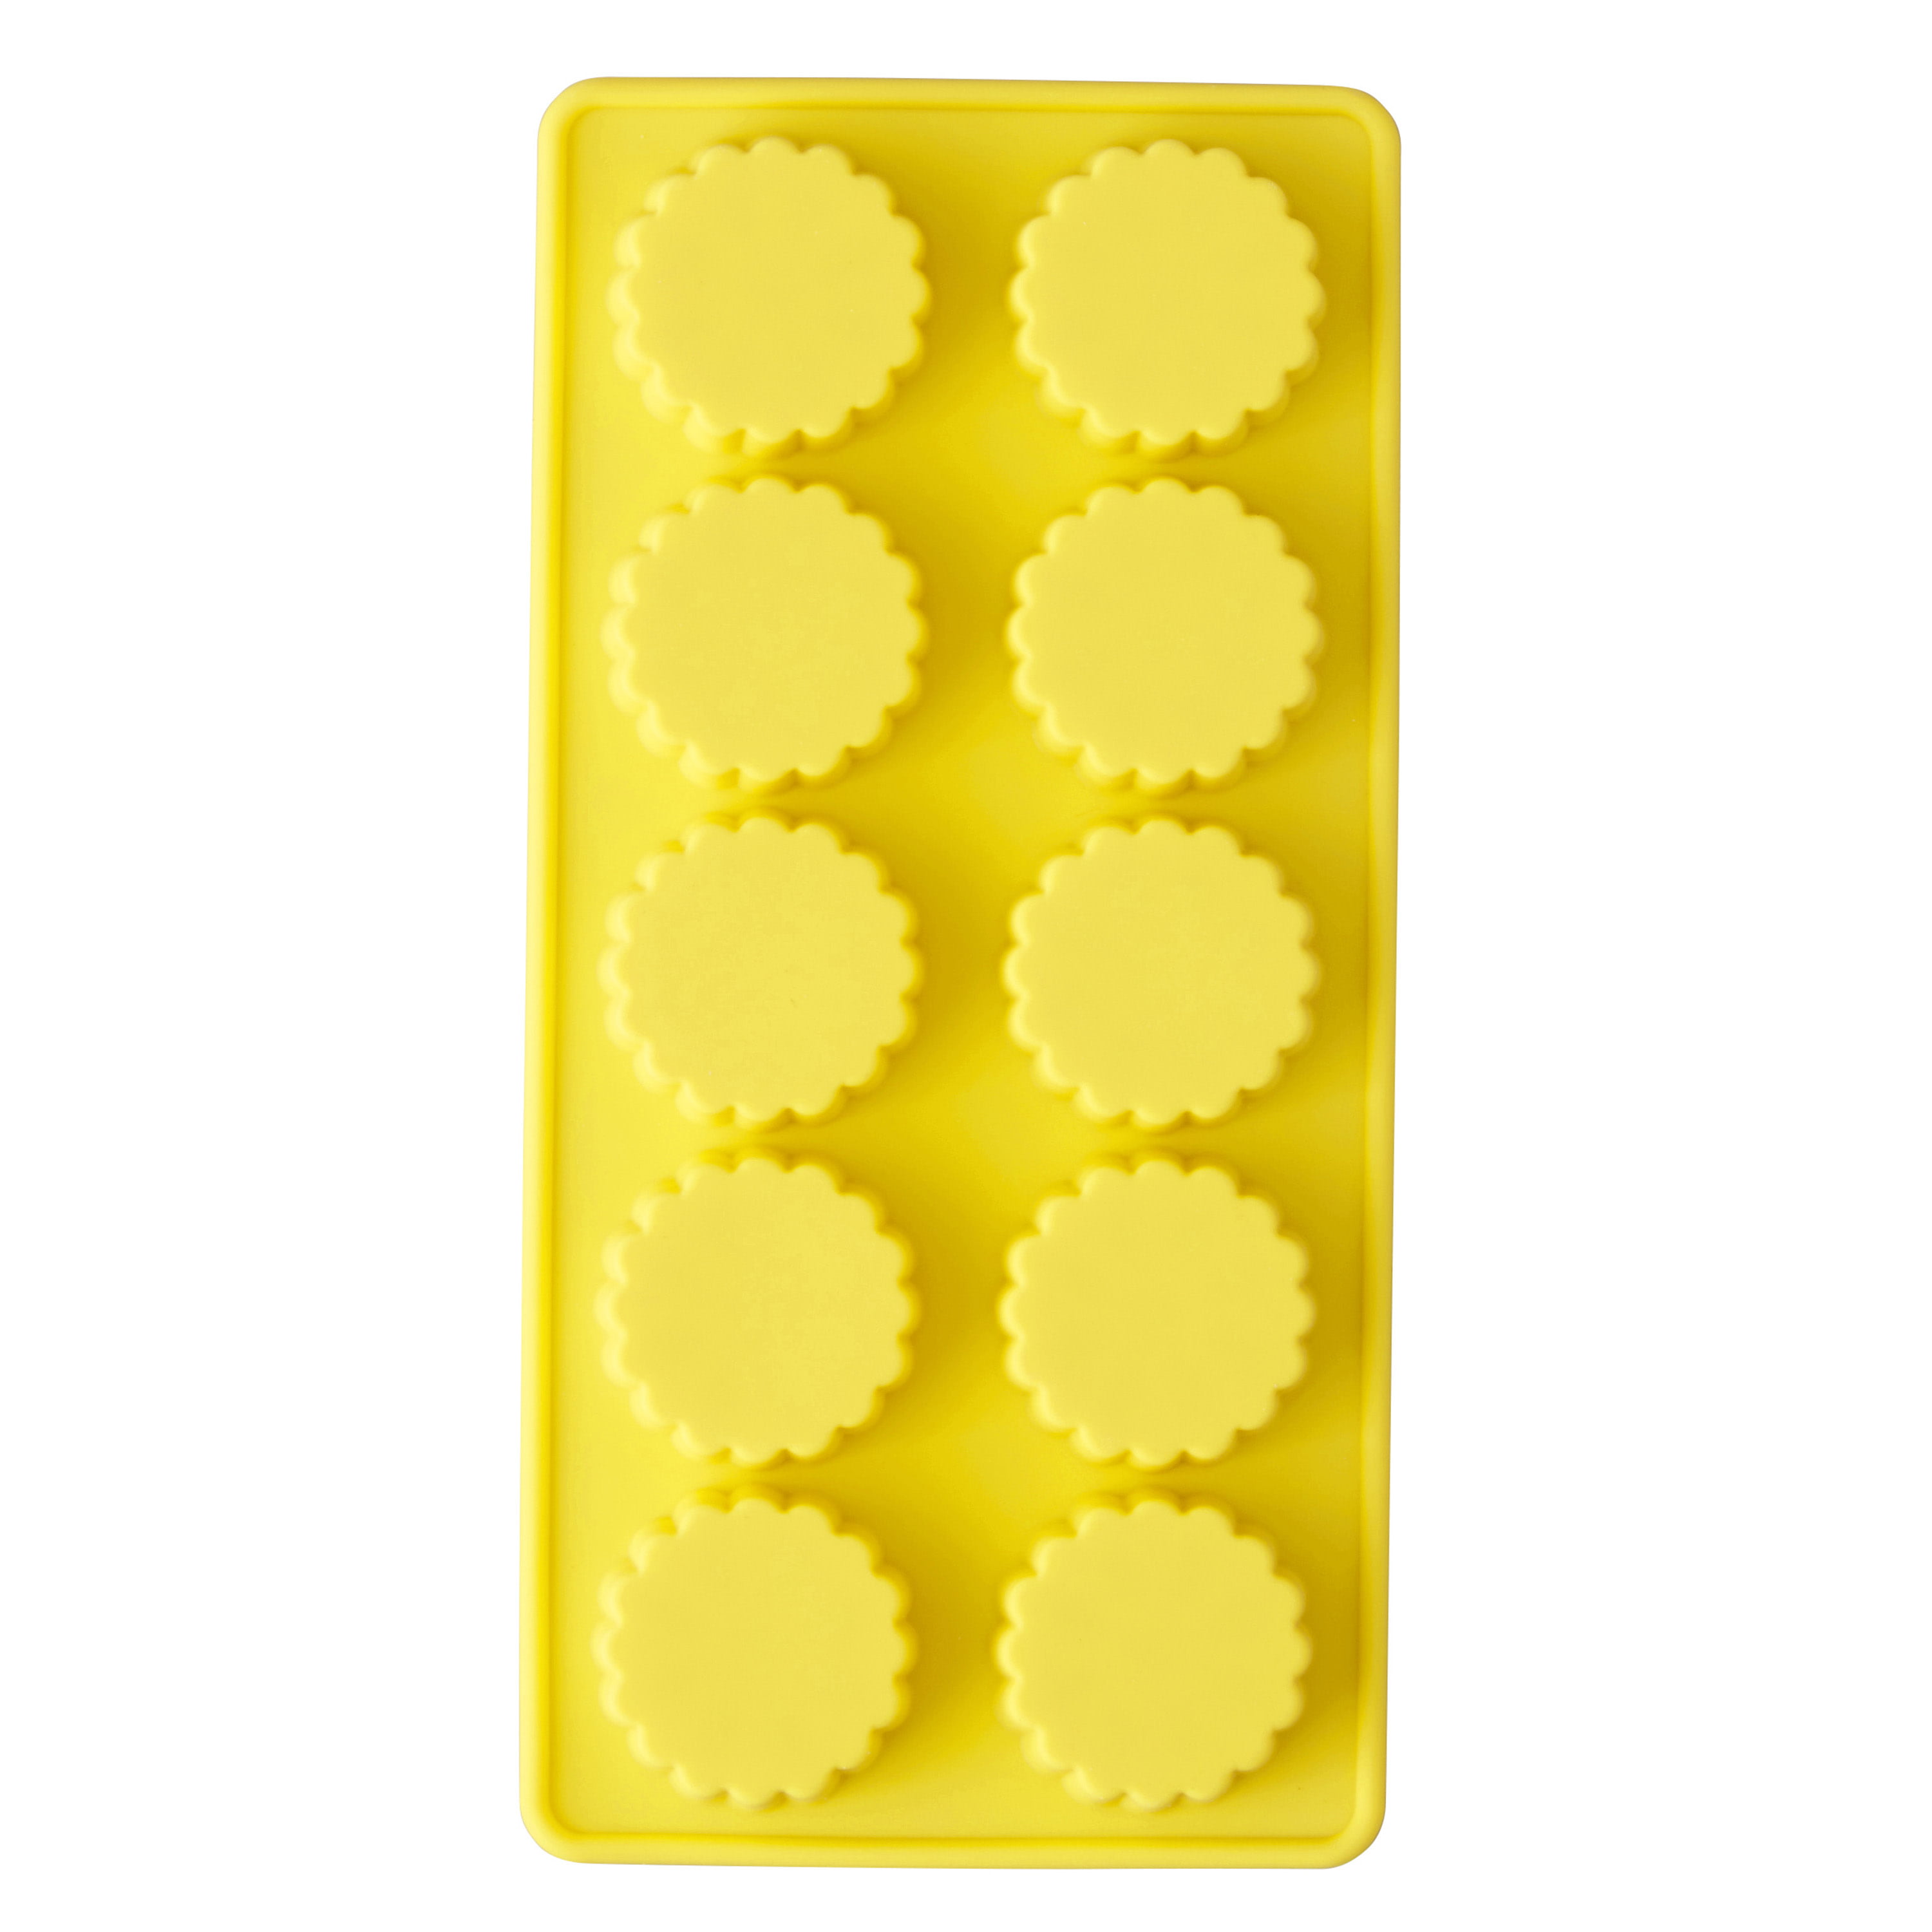 Candy Corn Embeds 80 Cavity Silicone Mold 928